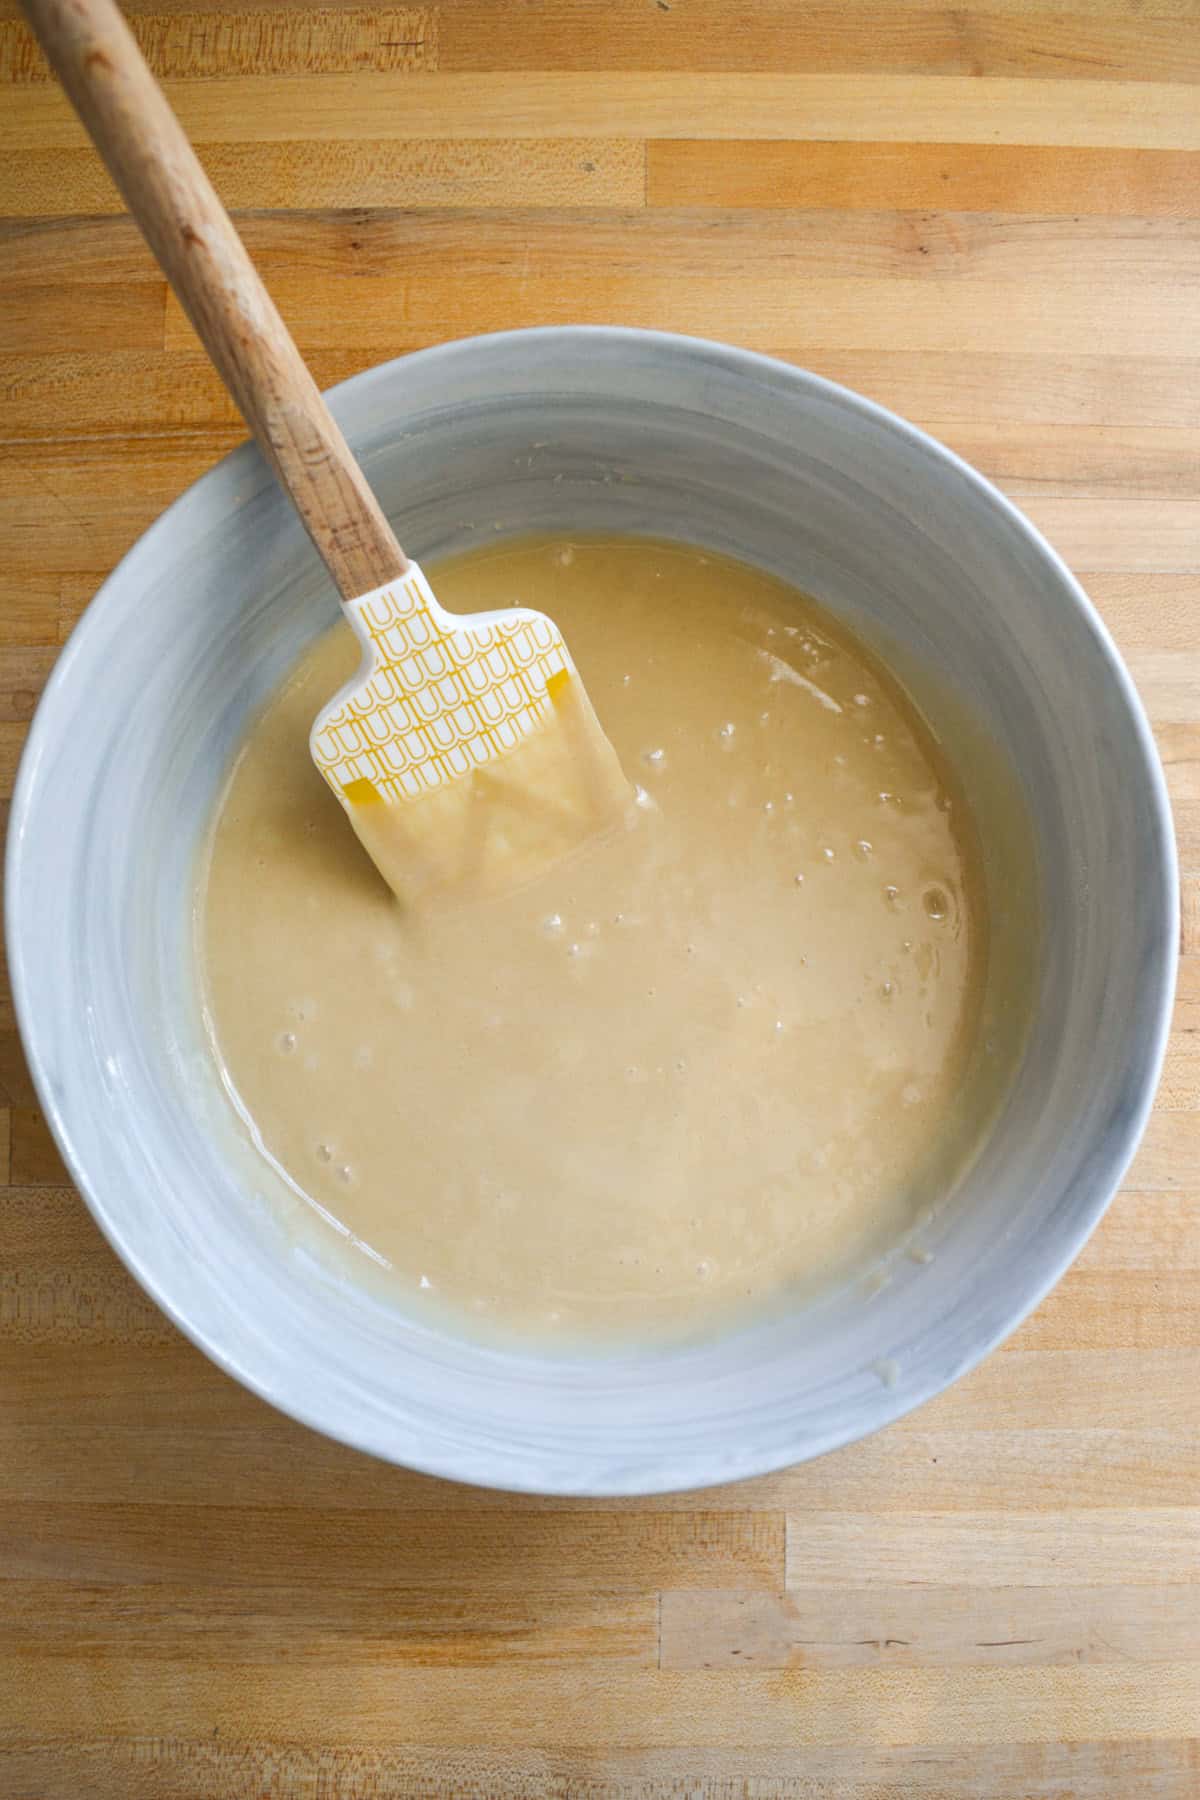 Vegan cupcake batter in a mixing bowl with a rubber spatula inside.